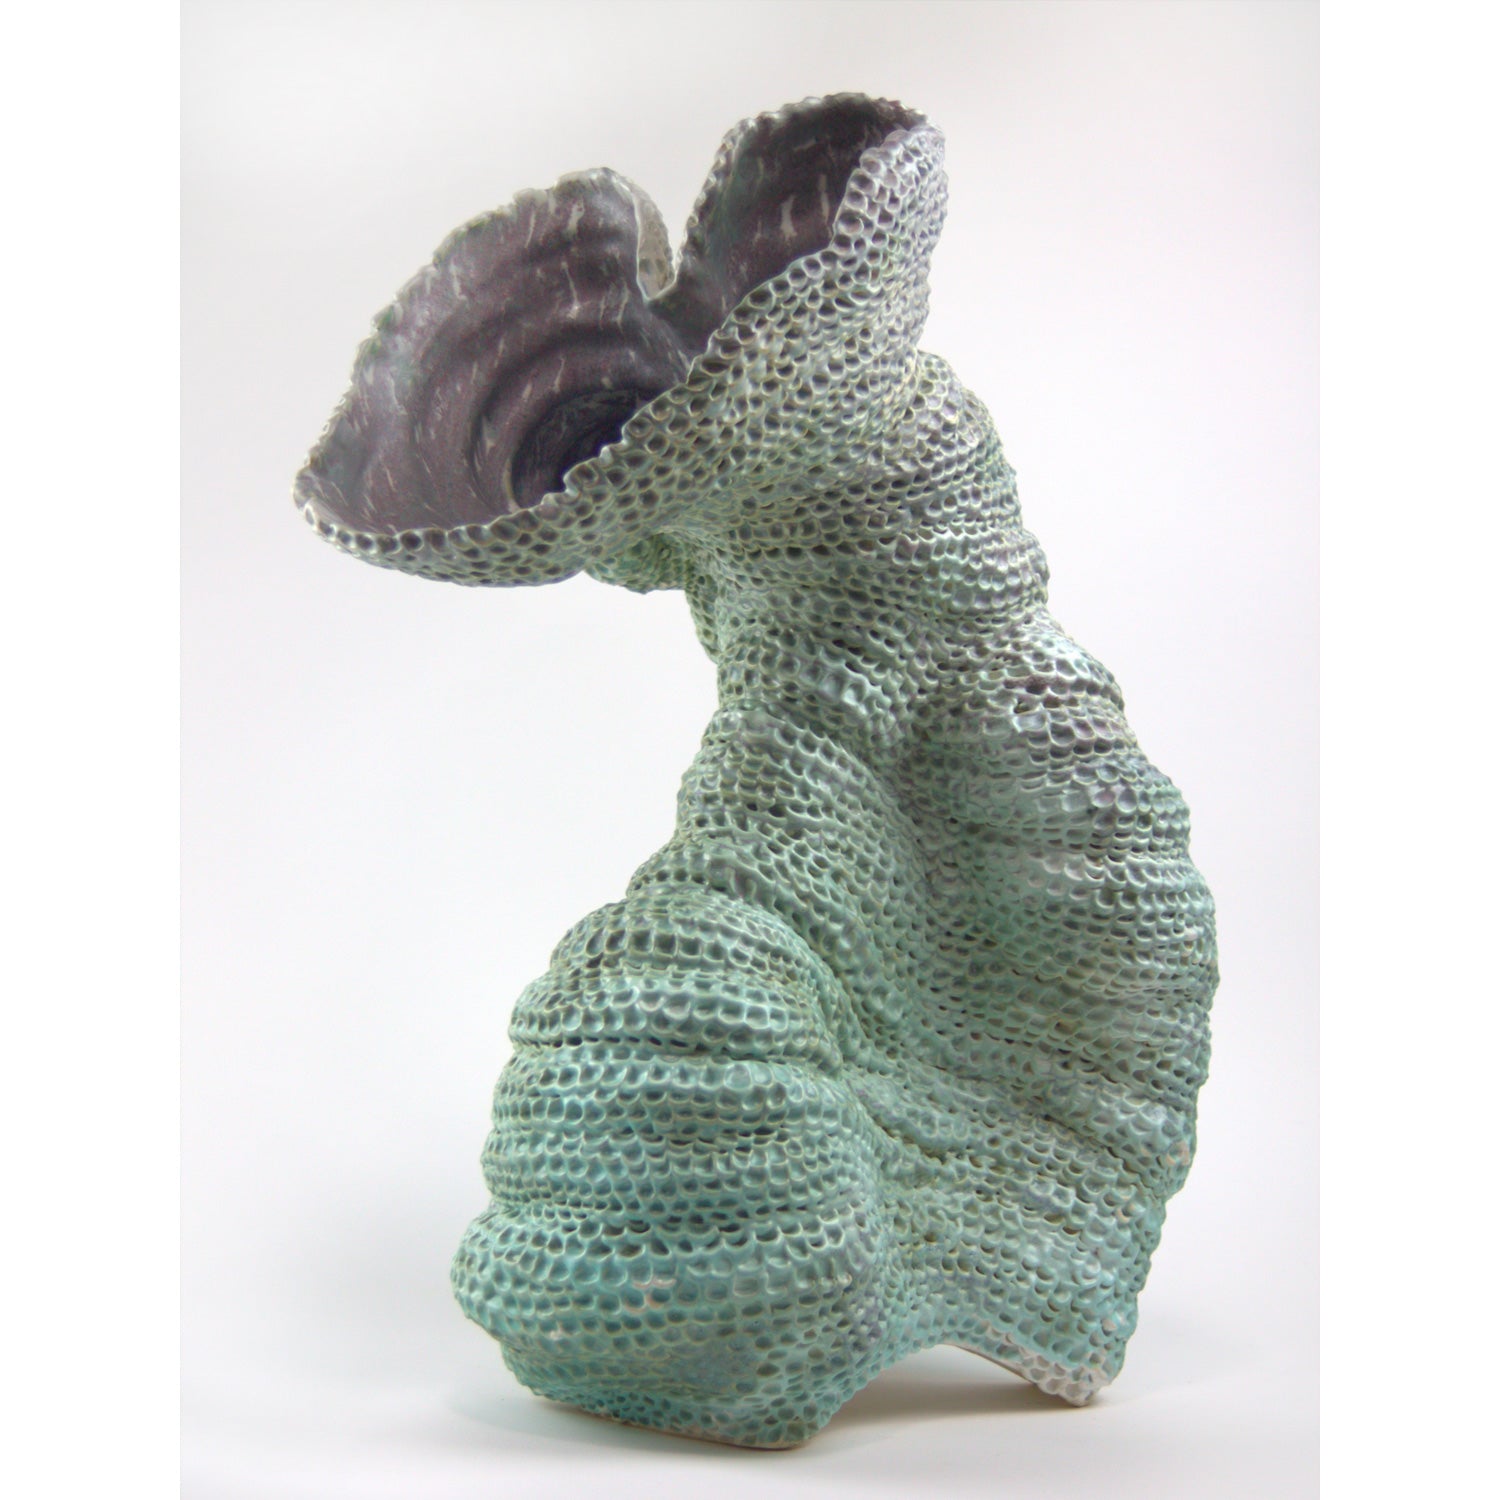 Kim Ross - Turquoise Form 4, 24" x 17" x 11"